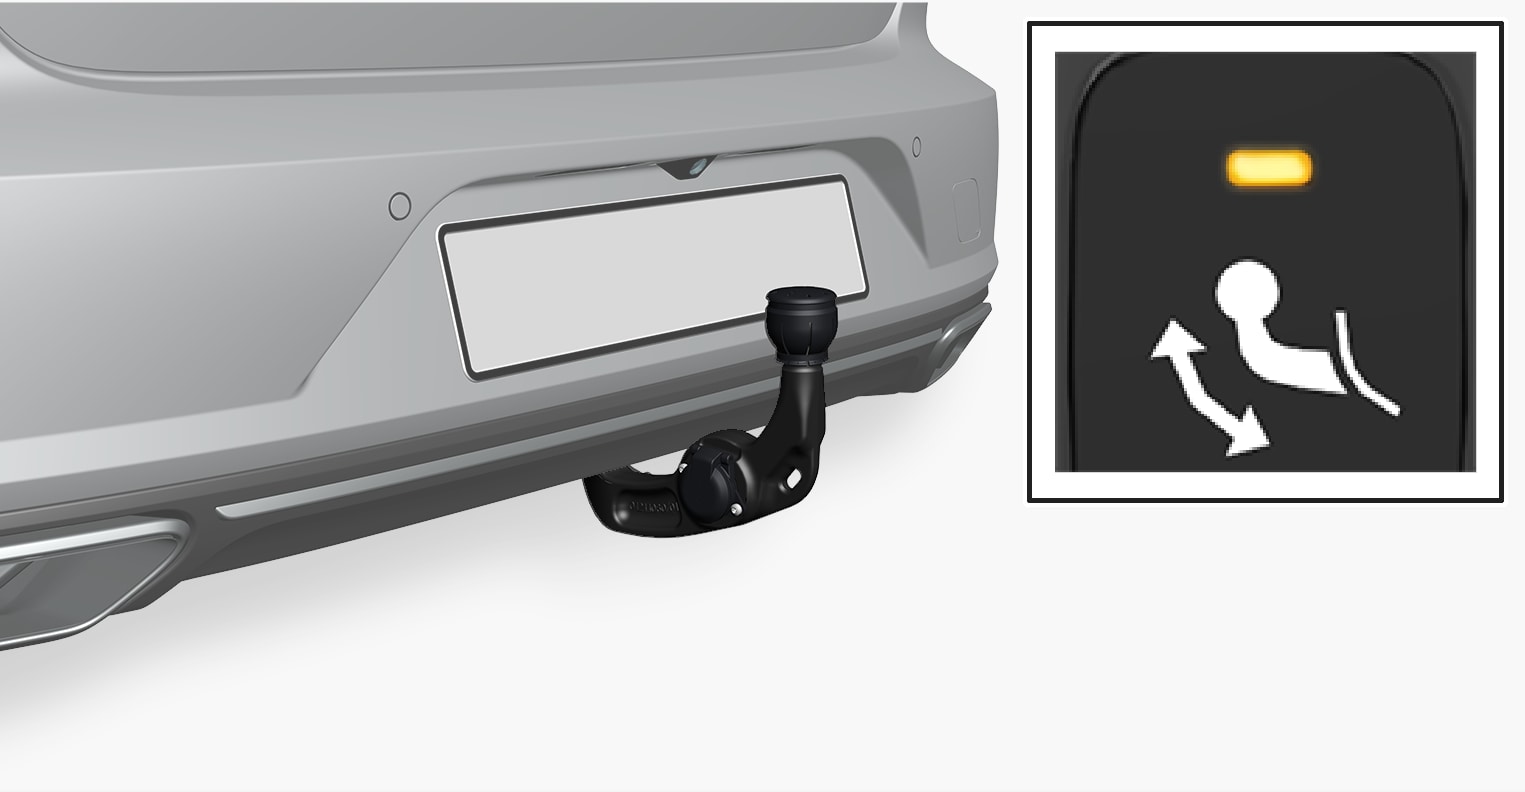 P5-1617-S90-V90-Swivable towbar and switch foldout step 3